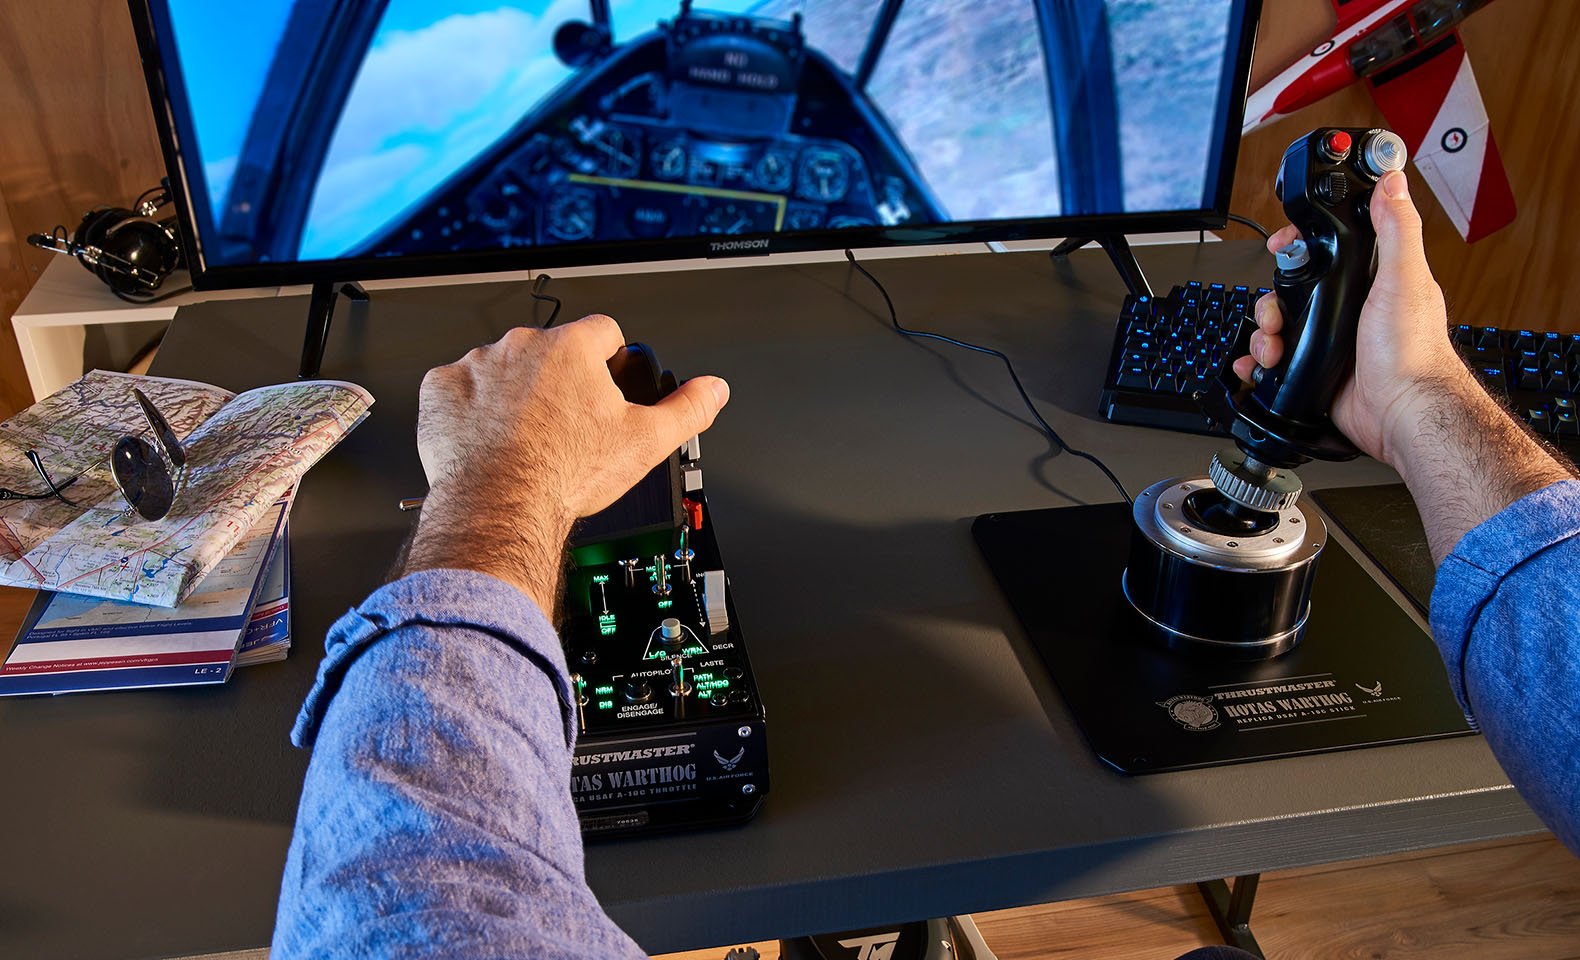 Thrustmaster HOTAS Warthog Flight Stick, Throttle and Control Panel for  Flight Simulation, Official Replica of the US Air Force A-10C Aircraft (PC)